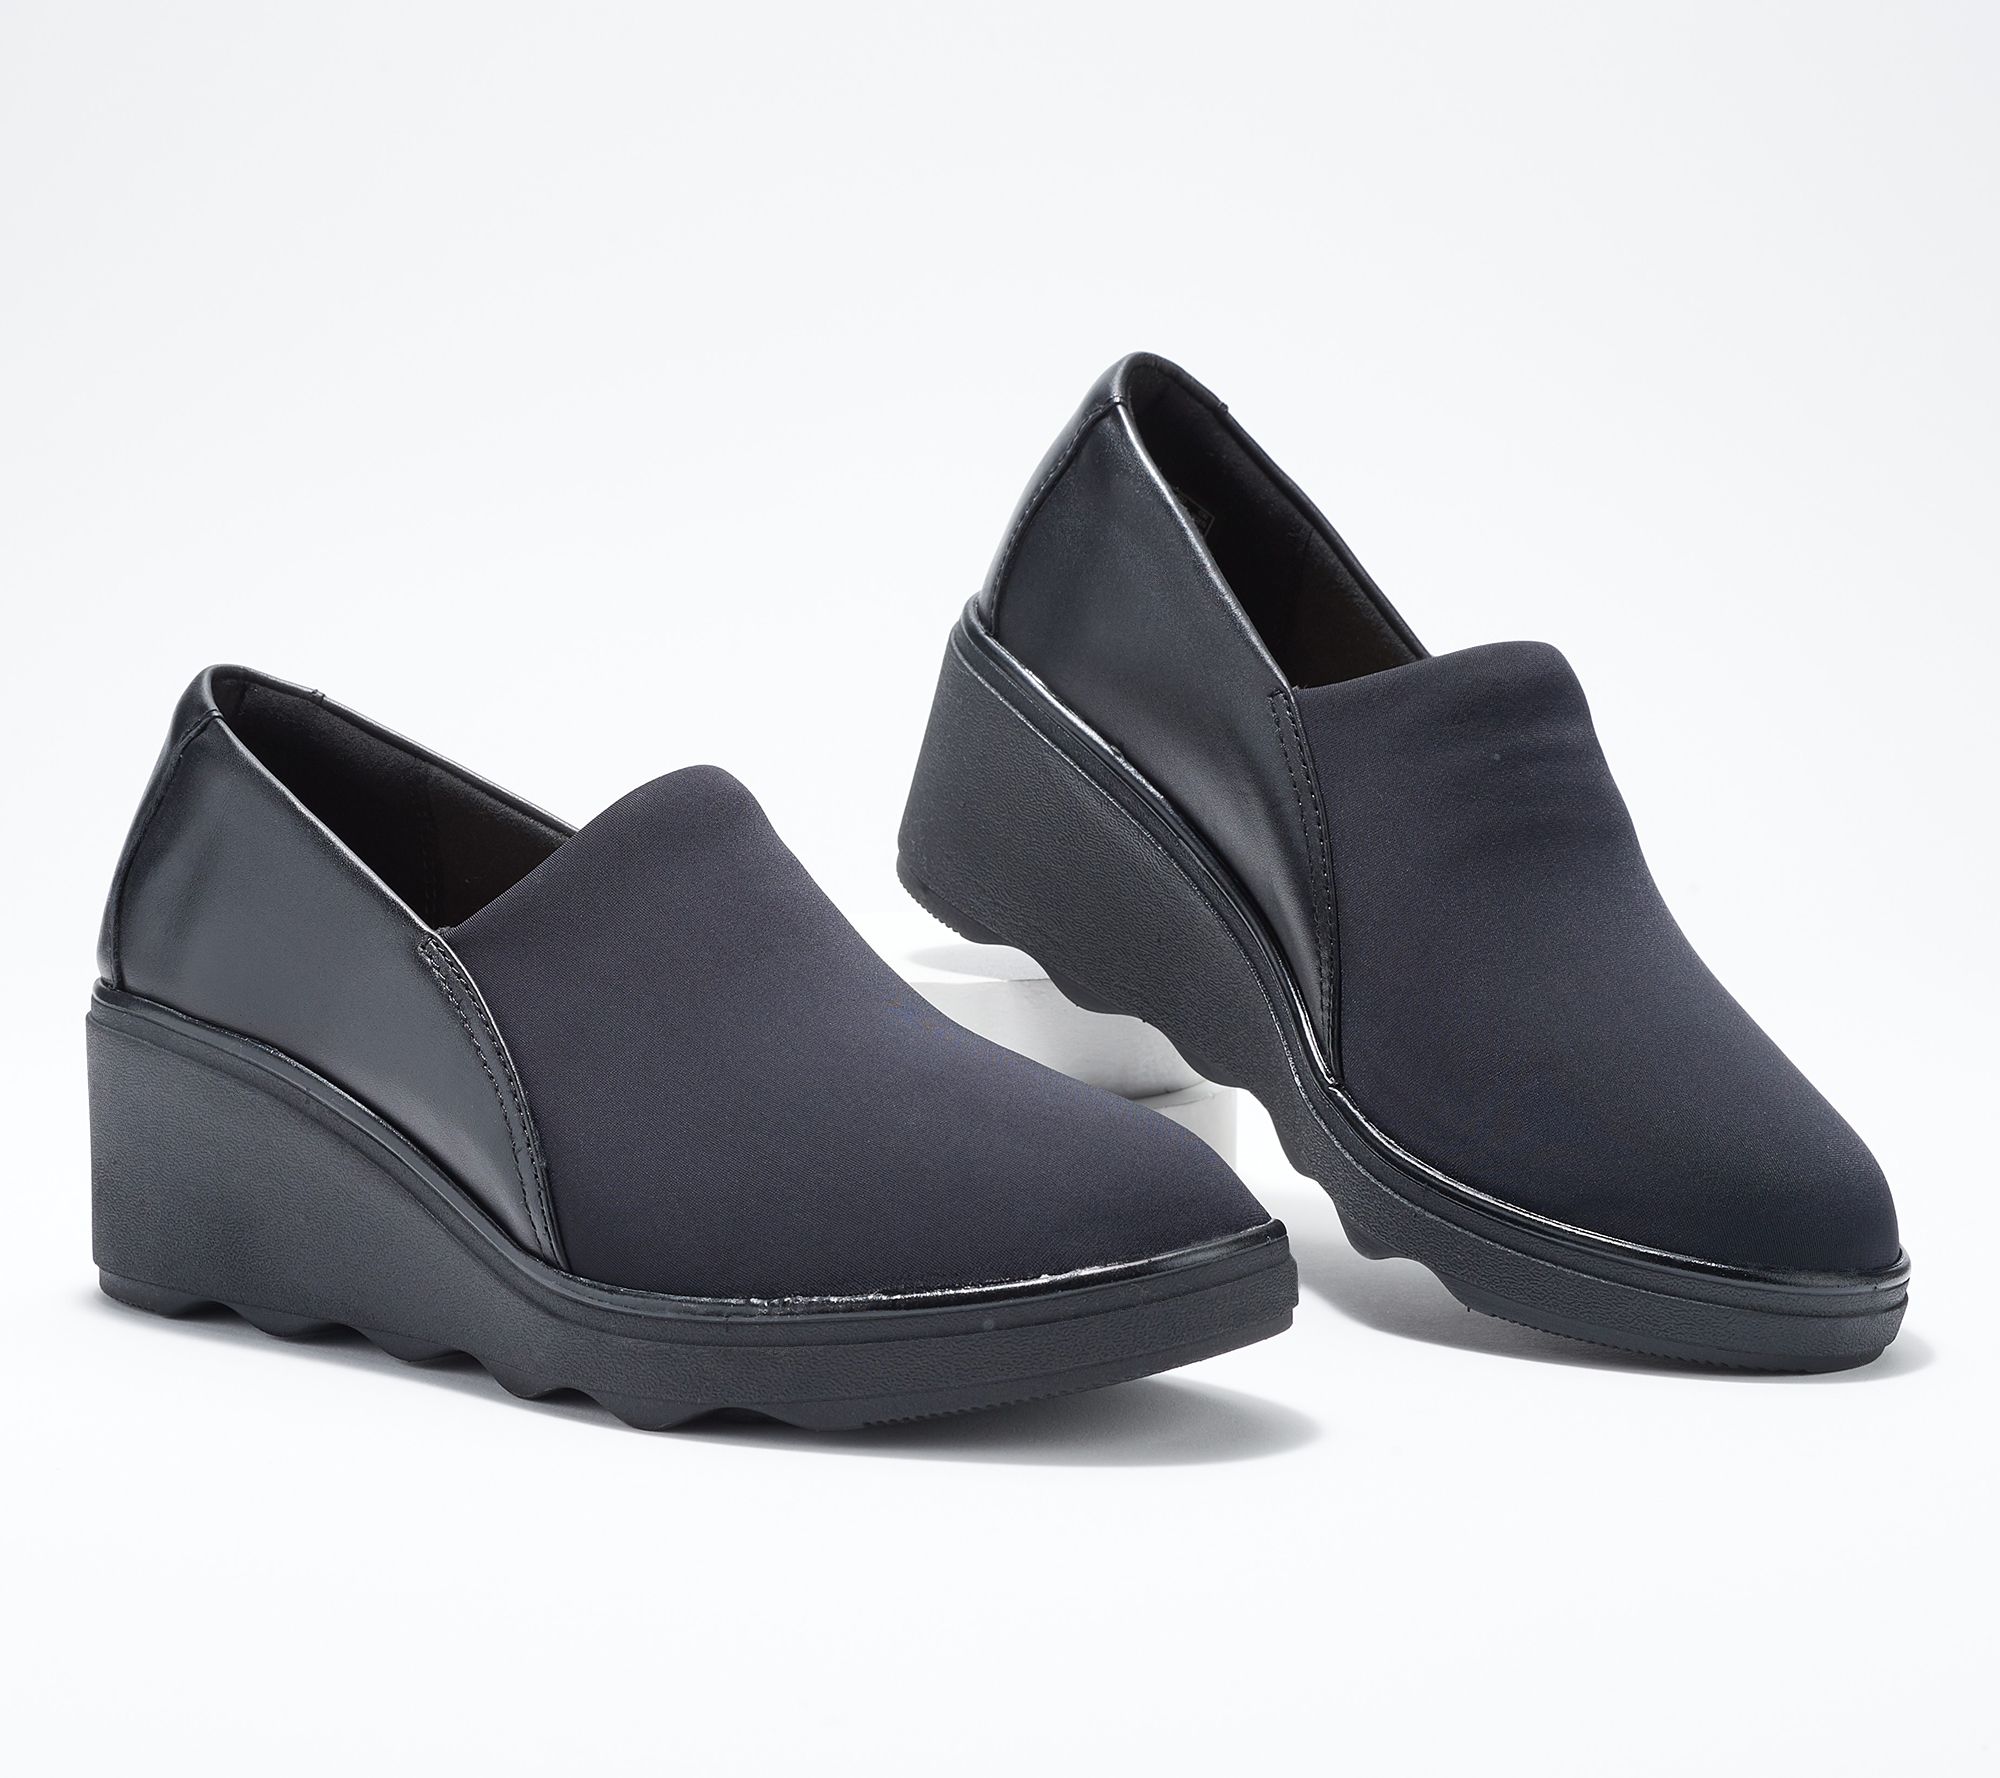 clarks in motion shoes qvc